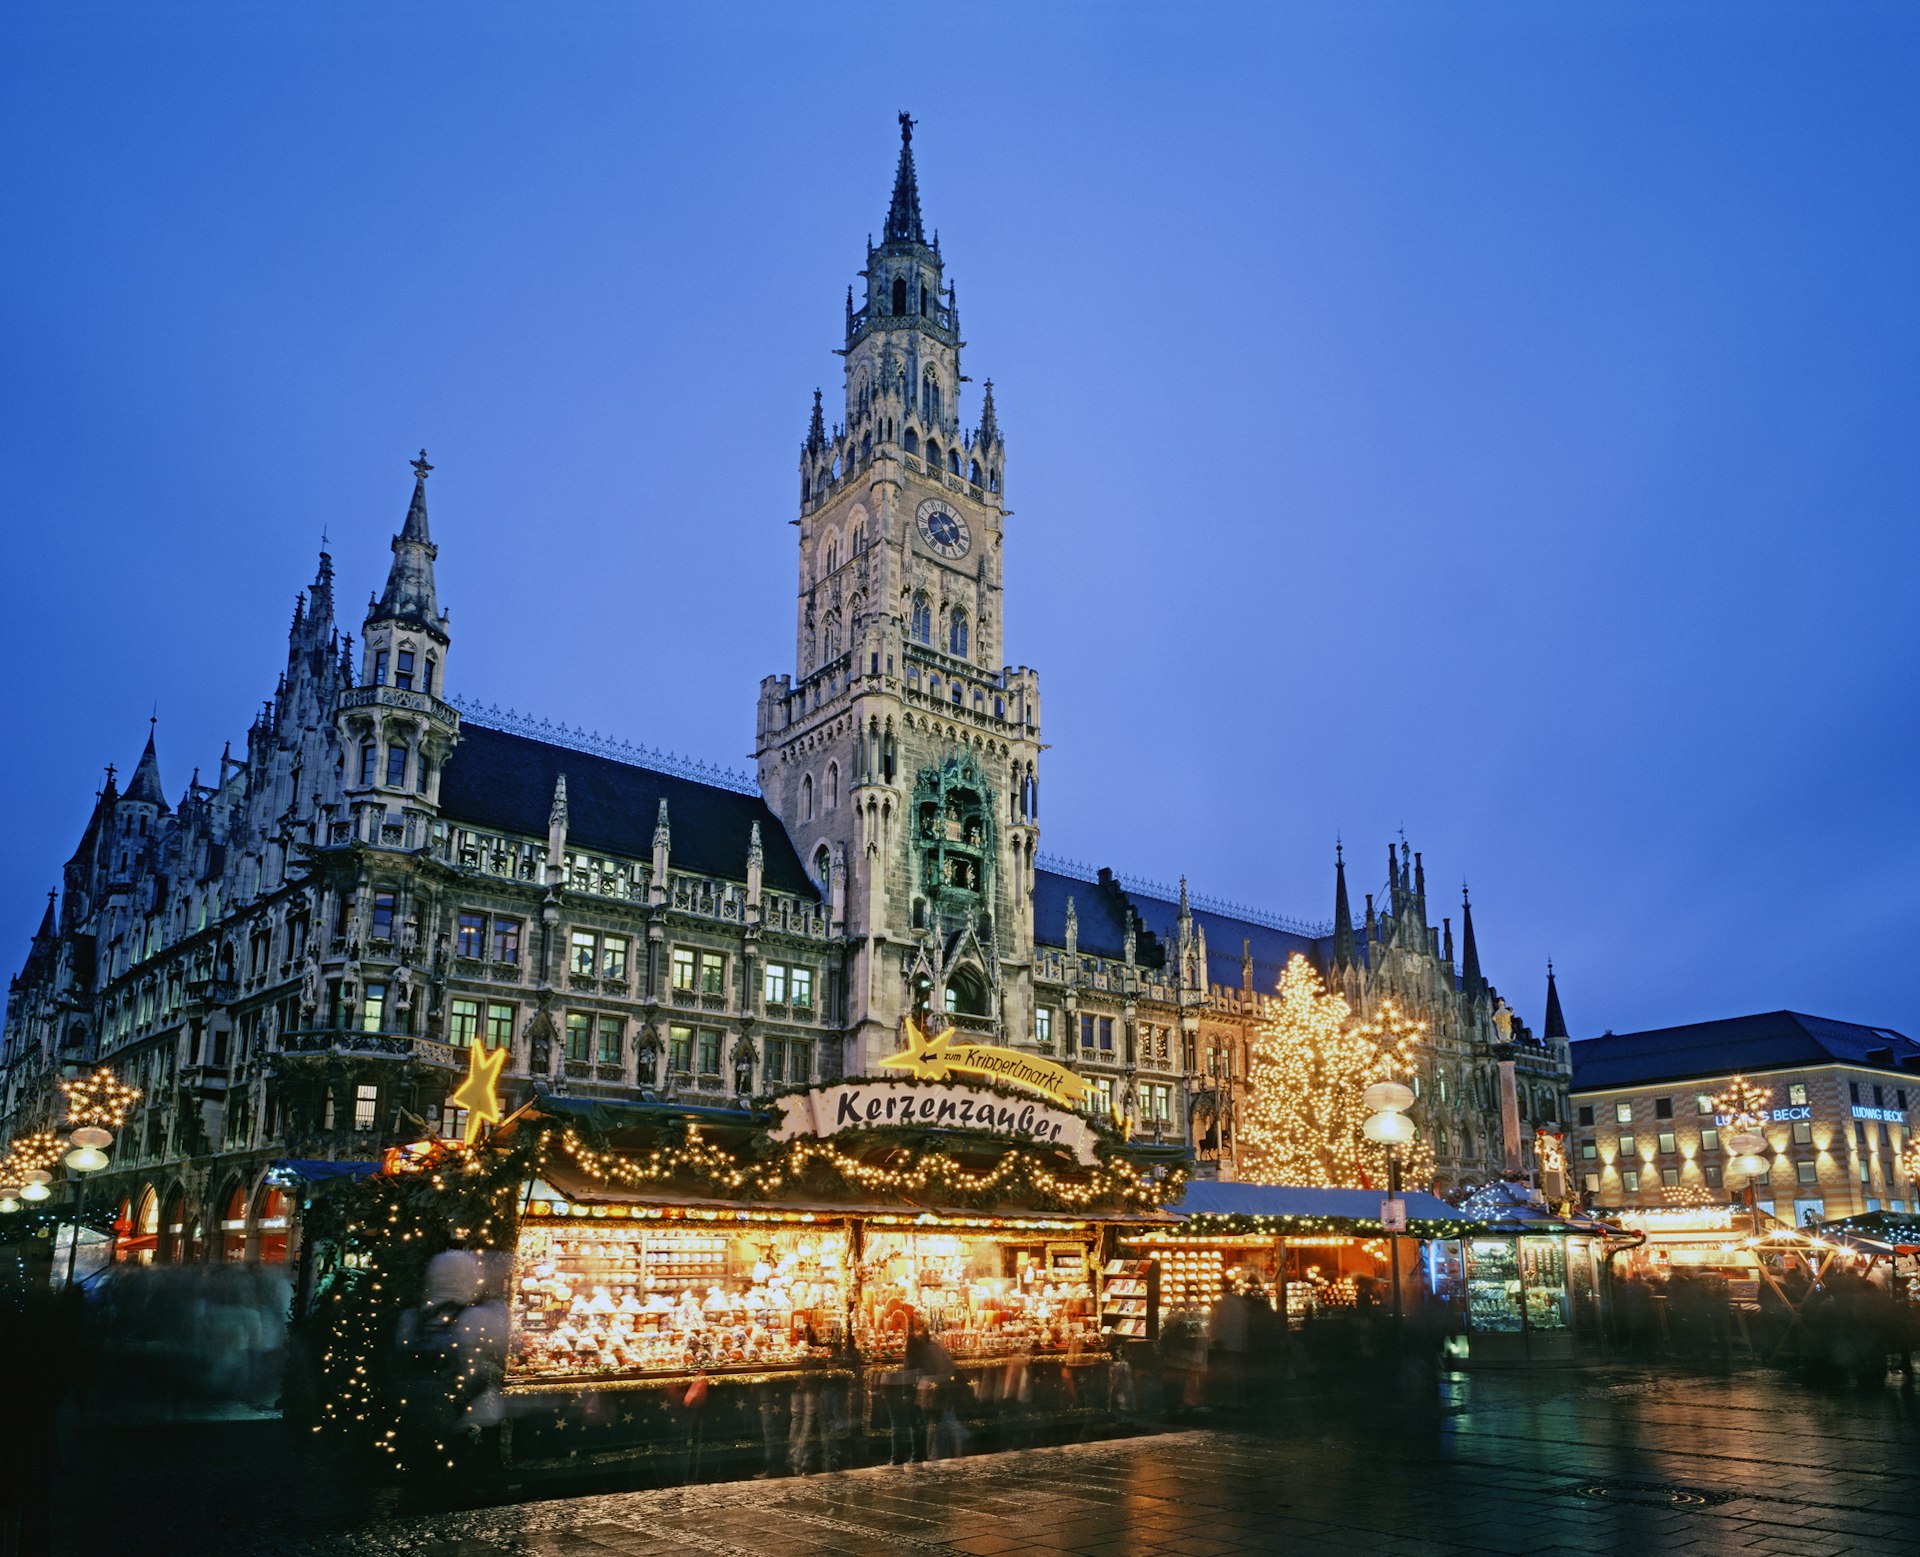 The lights of a Christmas market in twilight in front of New Town Hall on Marienplatz